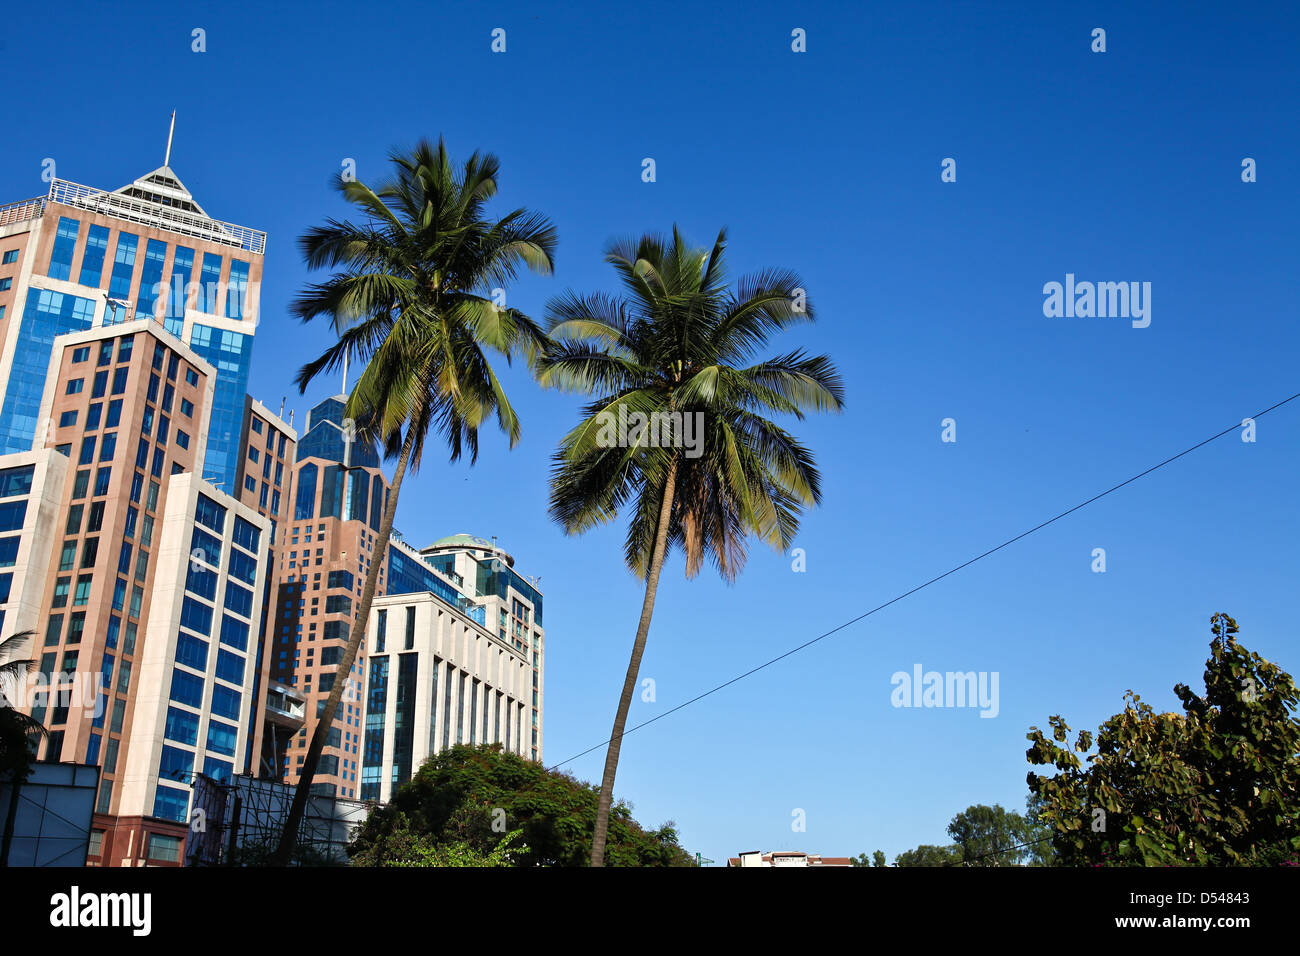 Ub tower hi-res stock photography and images - Alamy